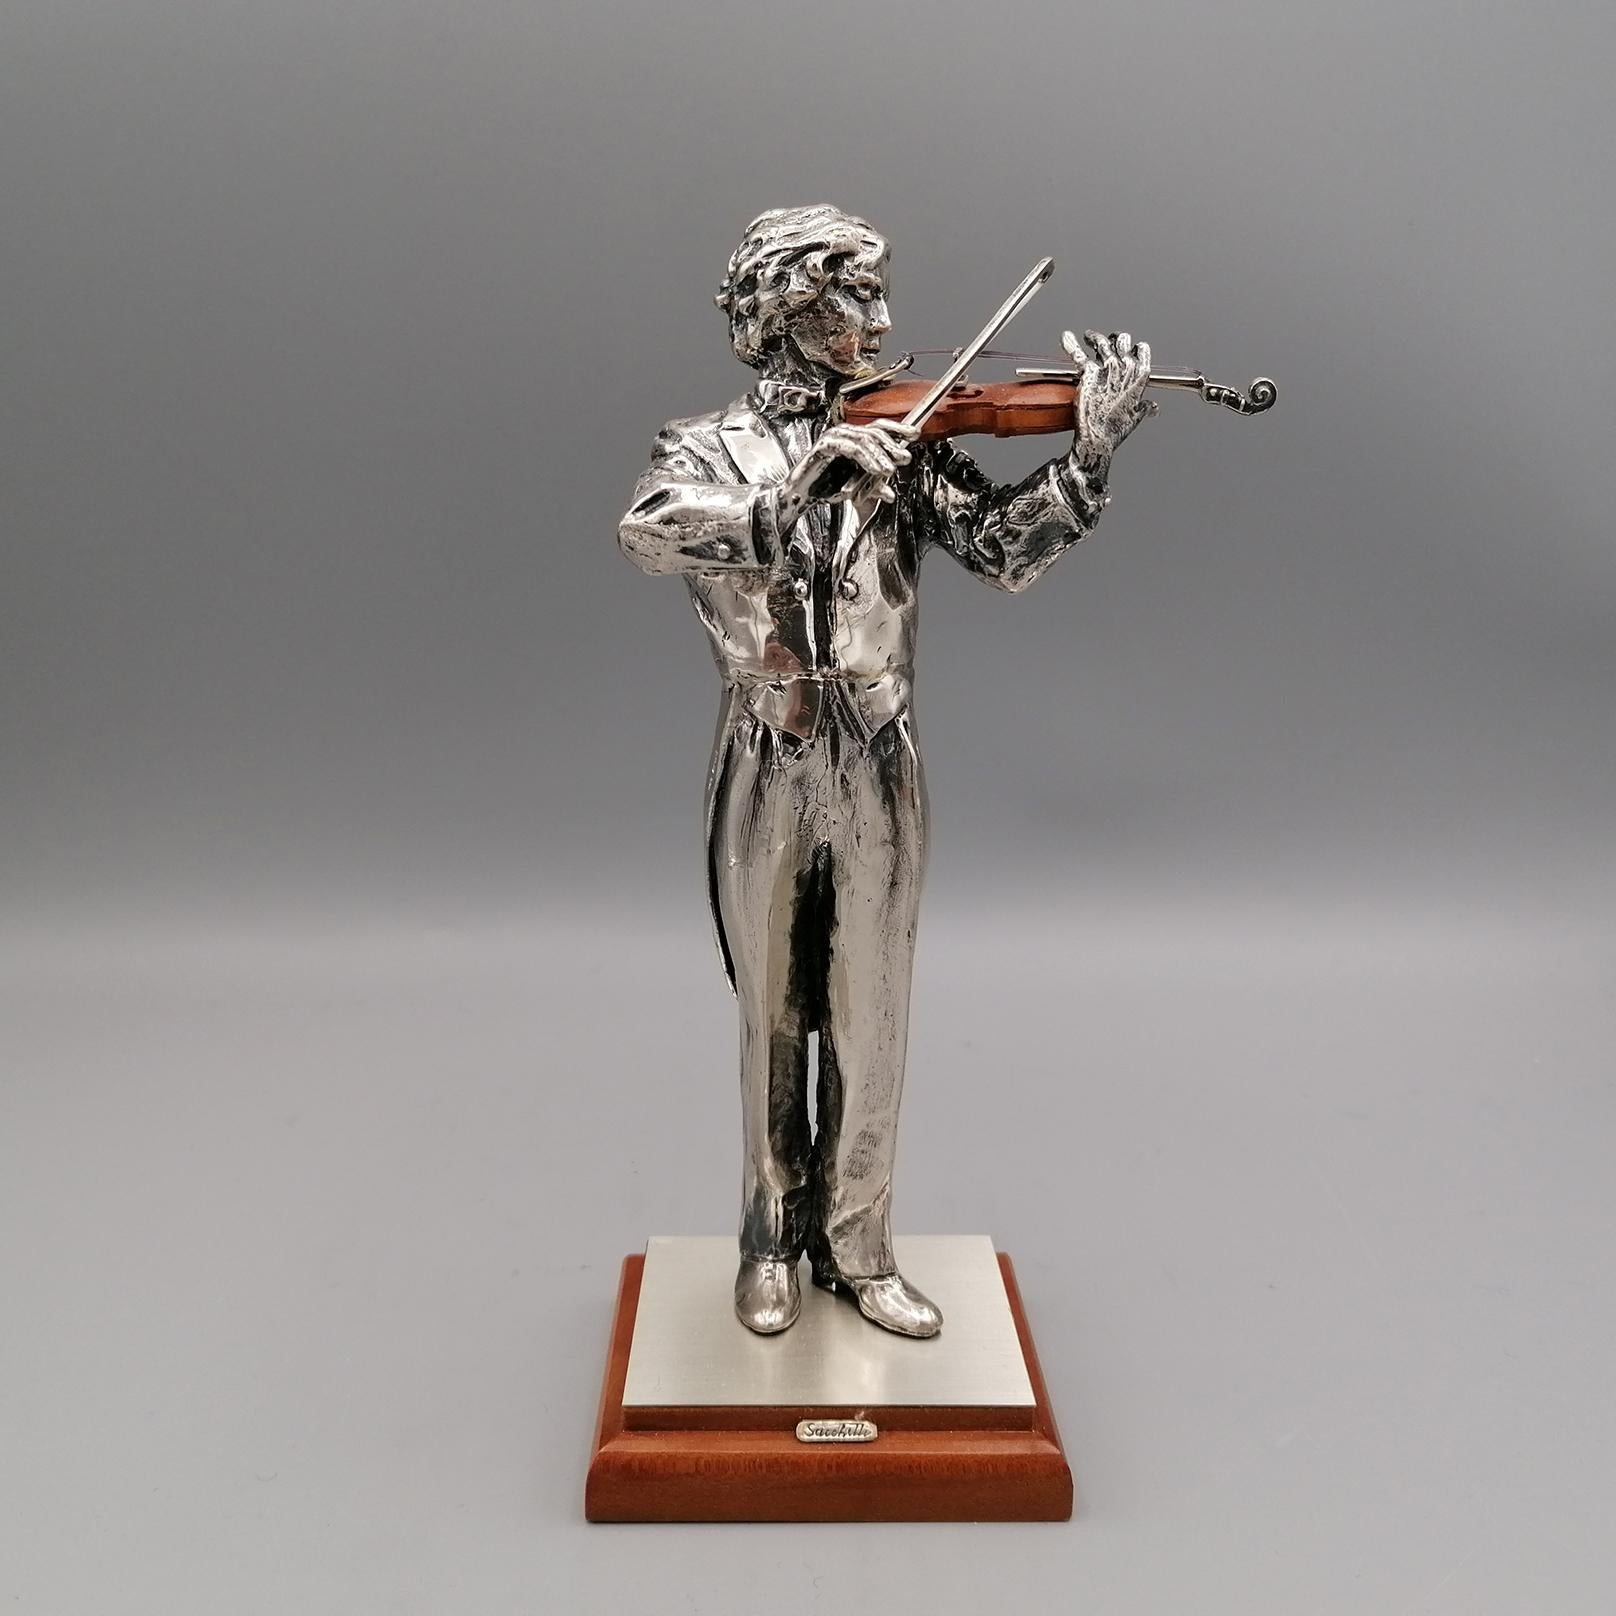 Violinist statue in solid 800 silver and with wooden violin and wooden base.
The state was made with the casting method and subsequently finished with a chisel. The details of the statue are very realistic and highlight the concentration of the